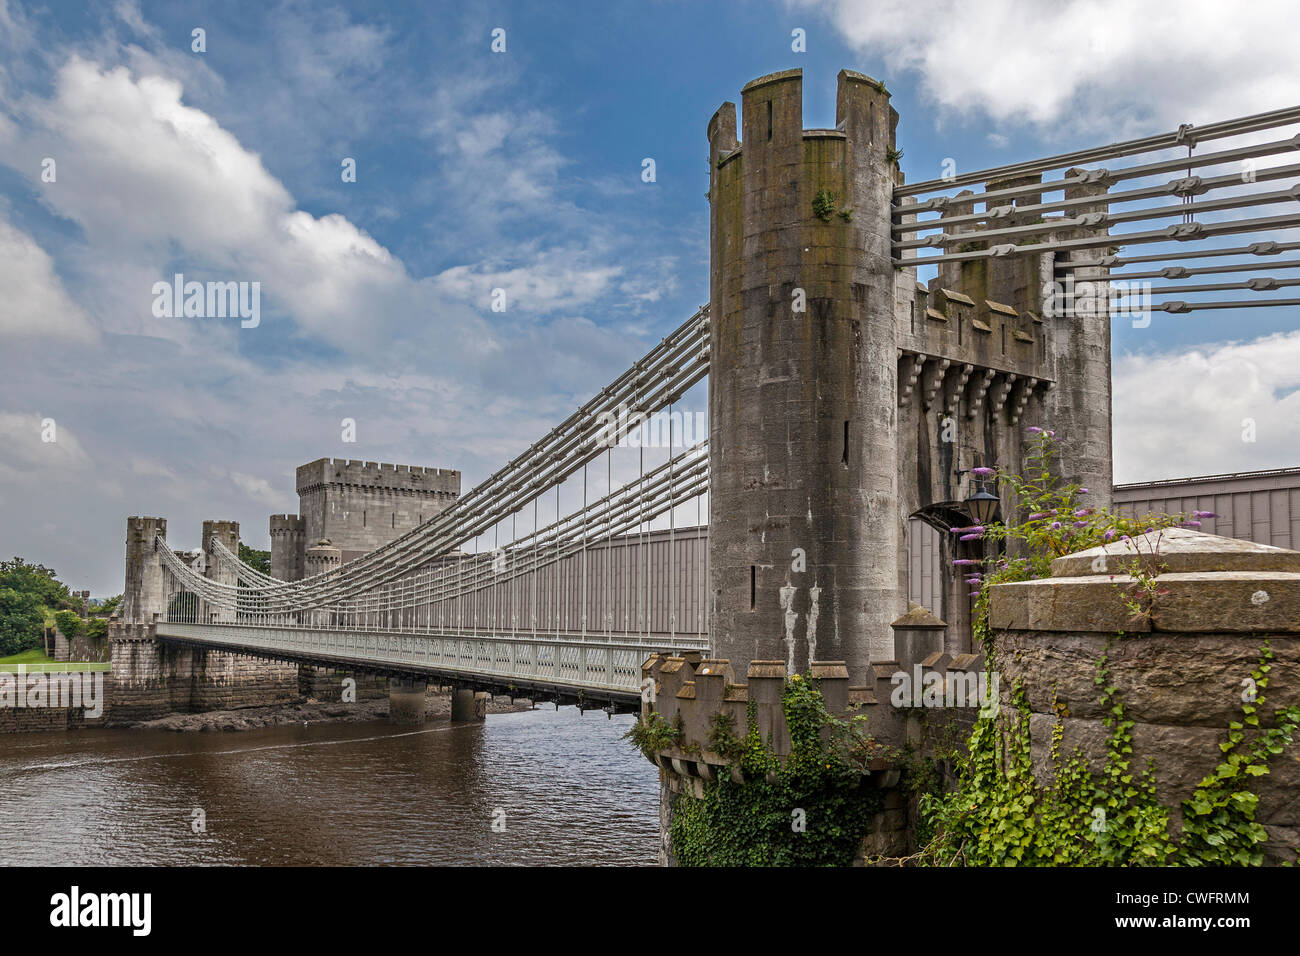 Conwy Suspension Bridge over the river Conwy. Clwyd Stock Photo